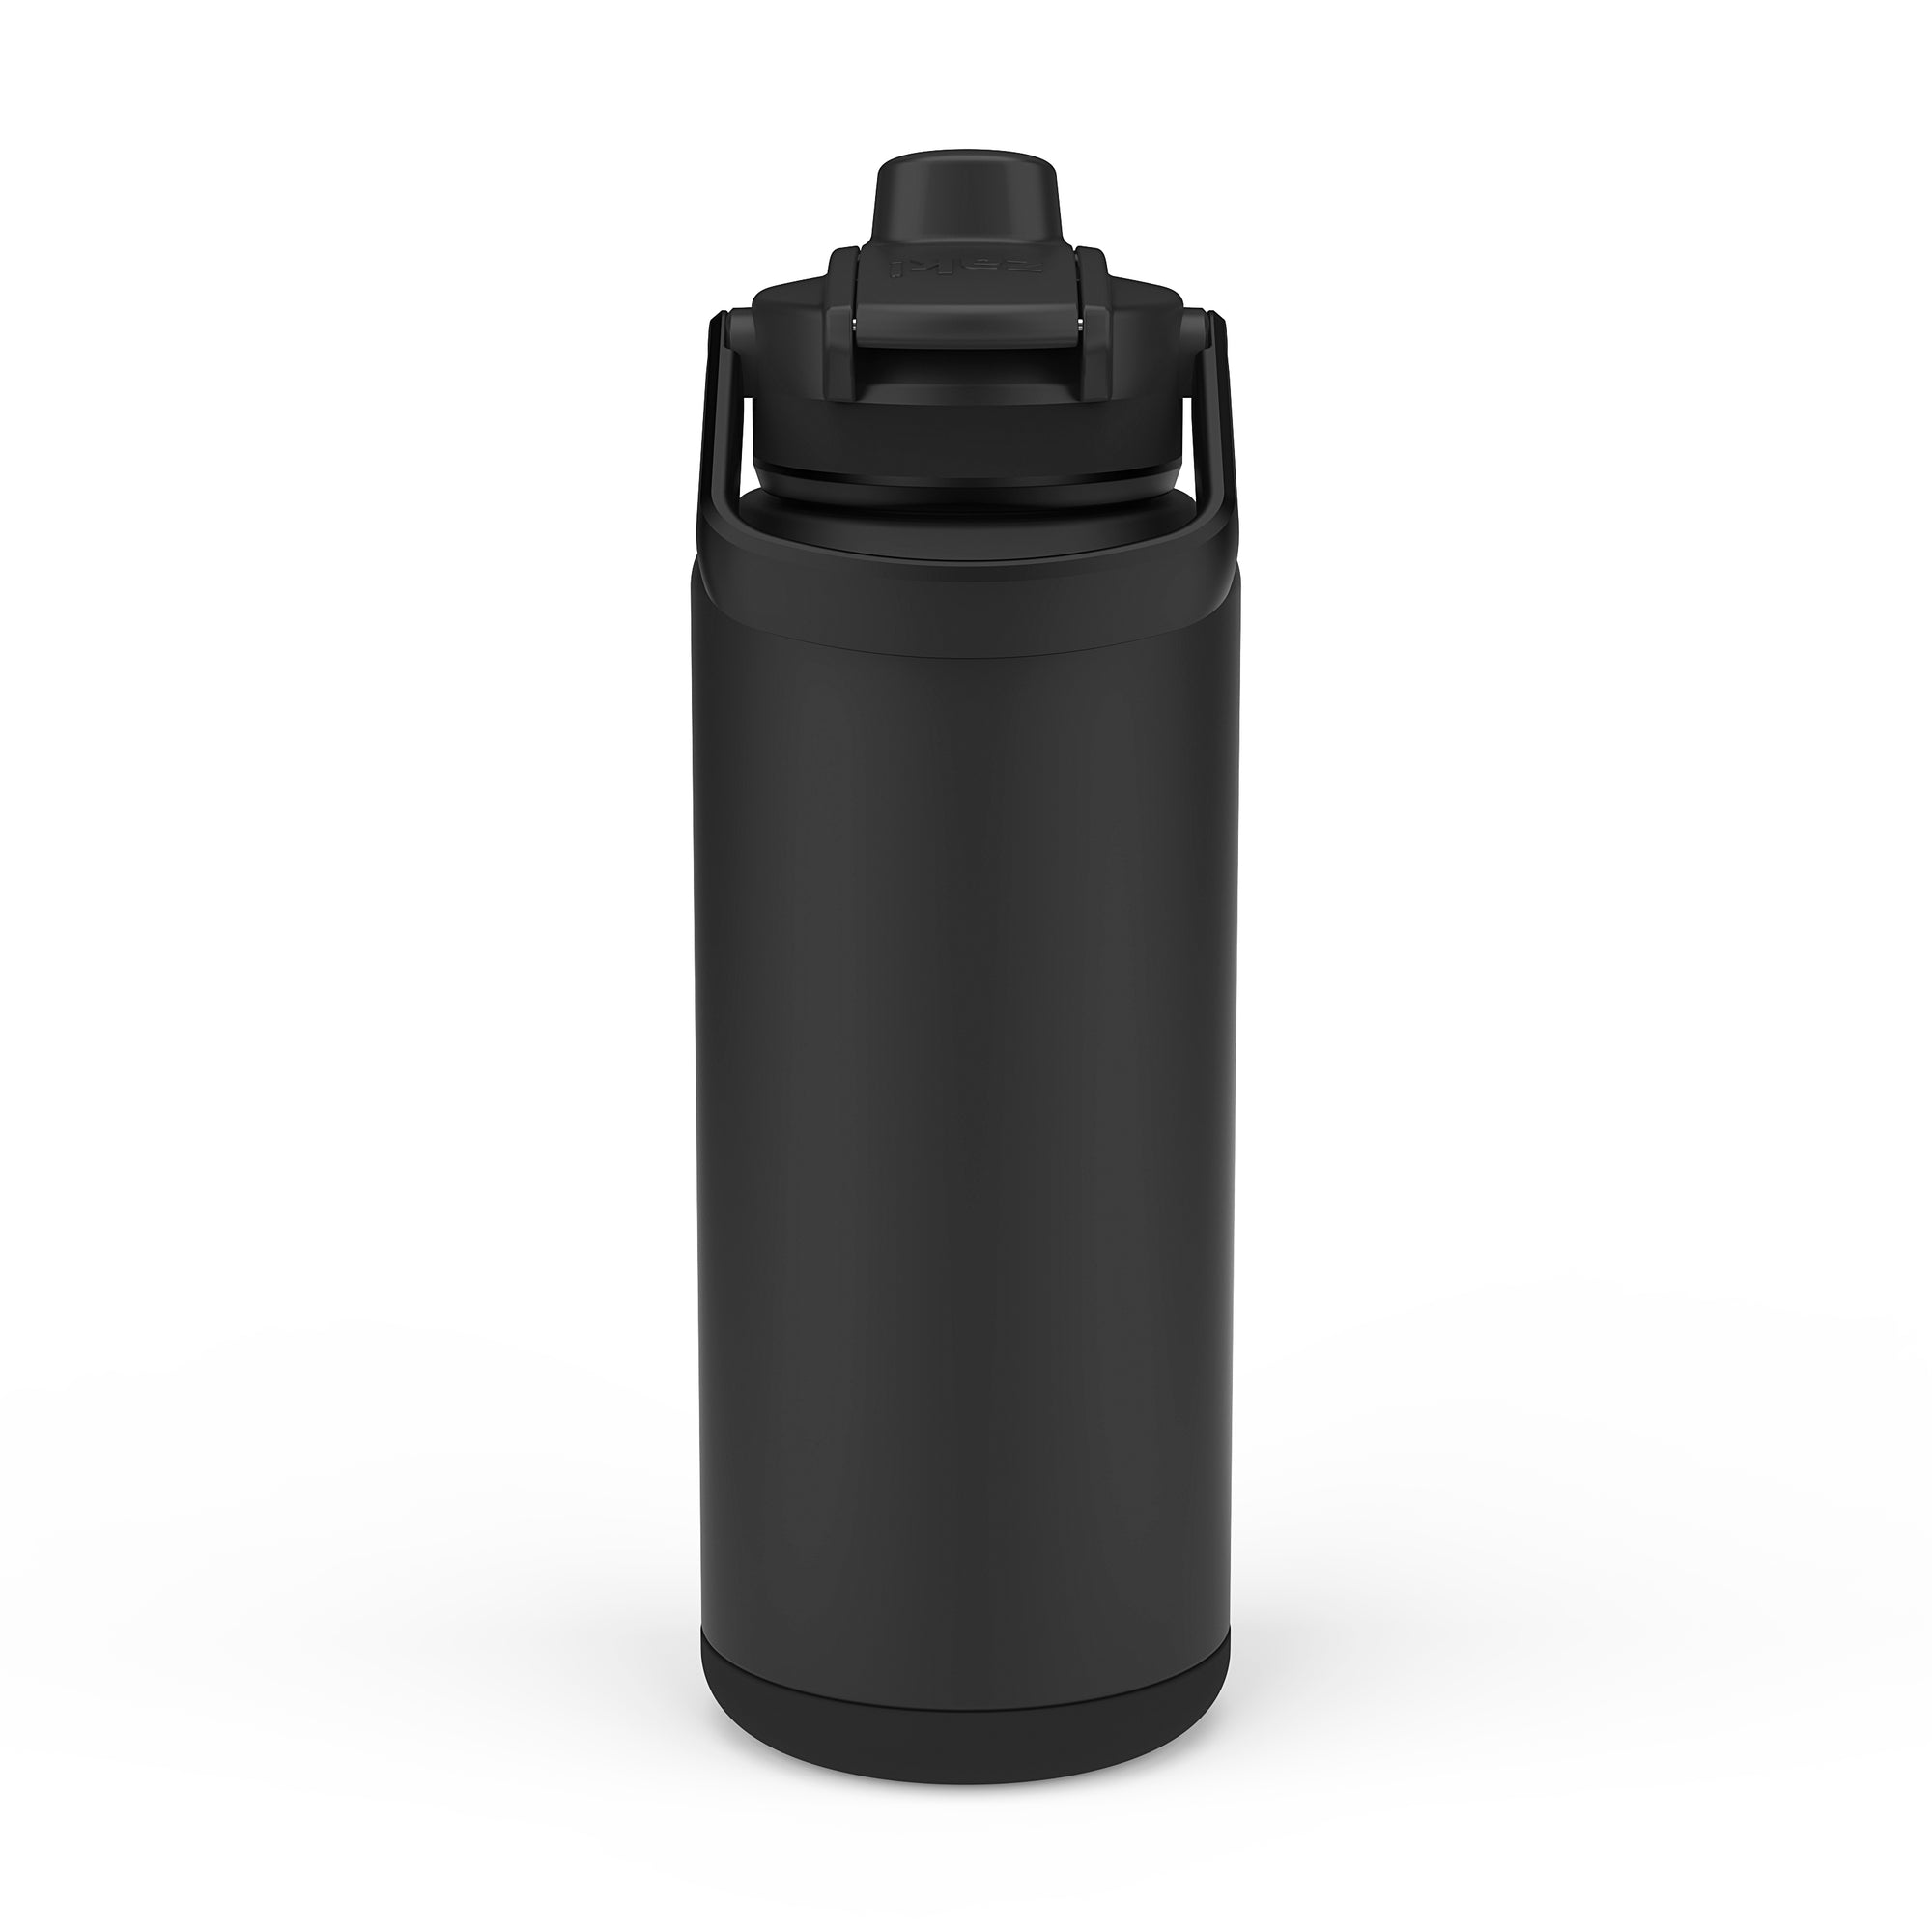 Beacon Insulated Water Bottle with Covered Antimicrobial Spout - Ebony, 32 ounces